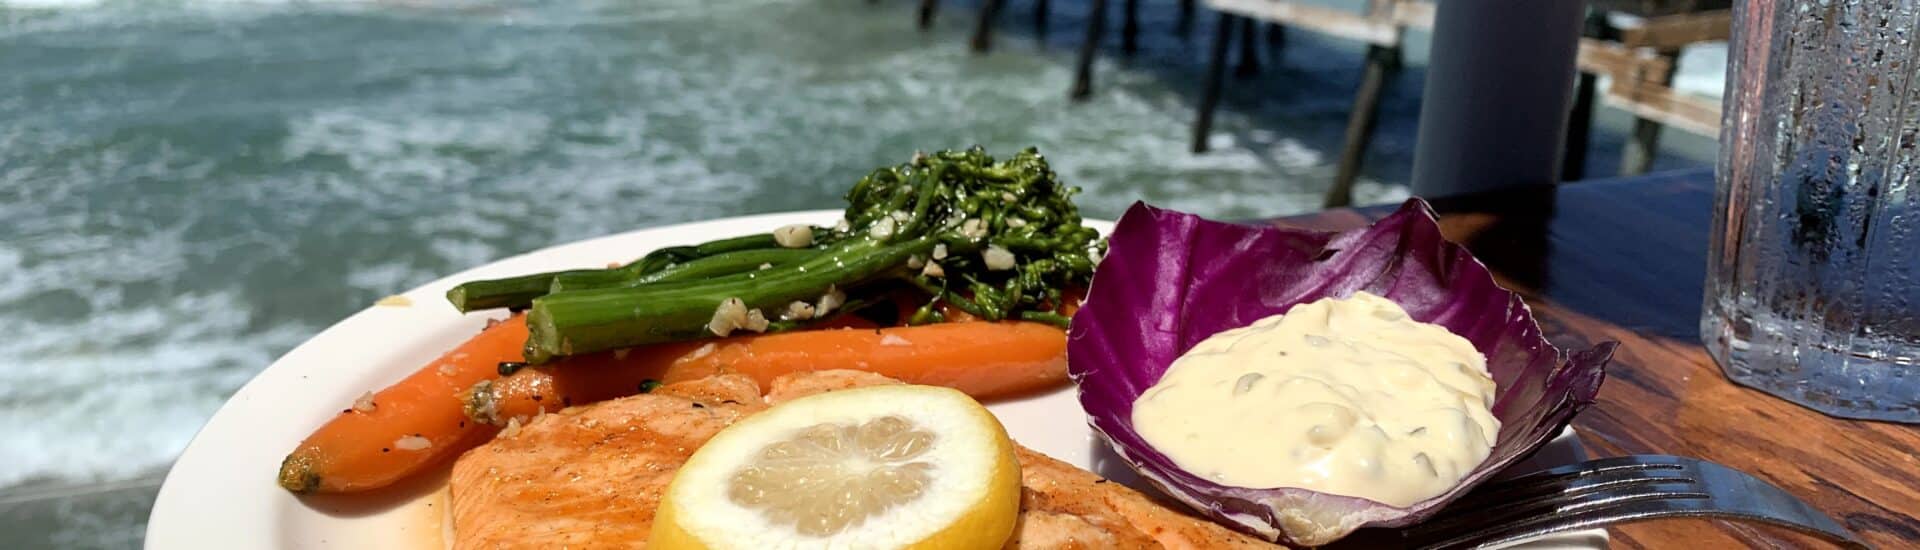 Fish plate with ocean and pier in background